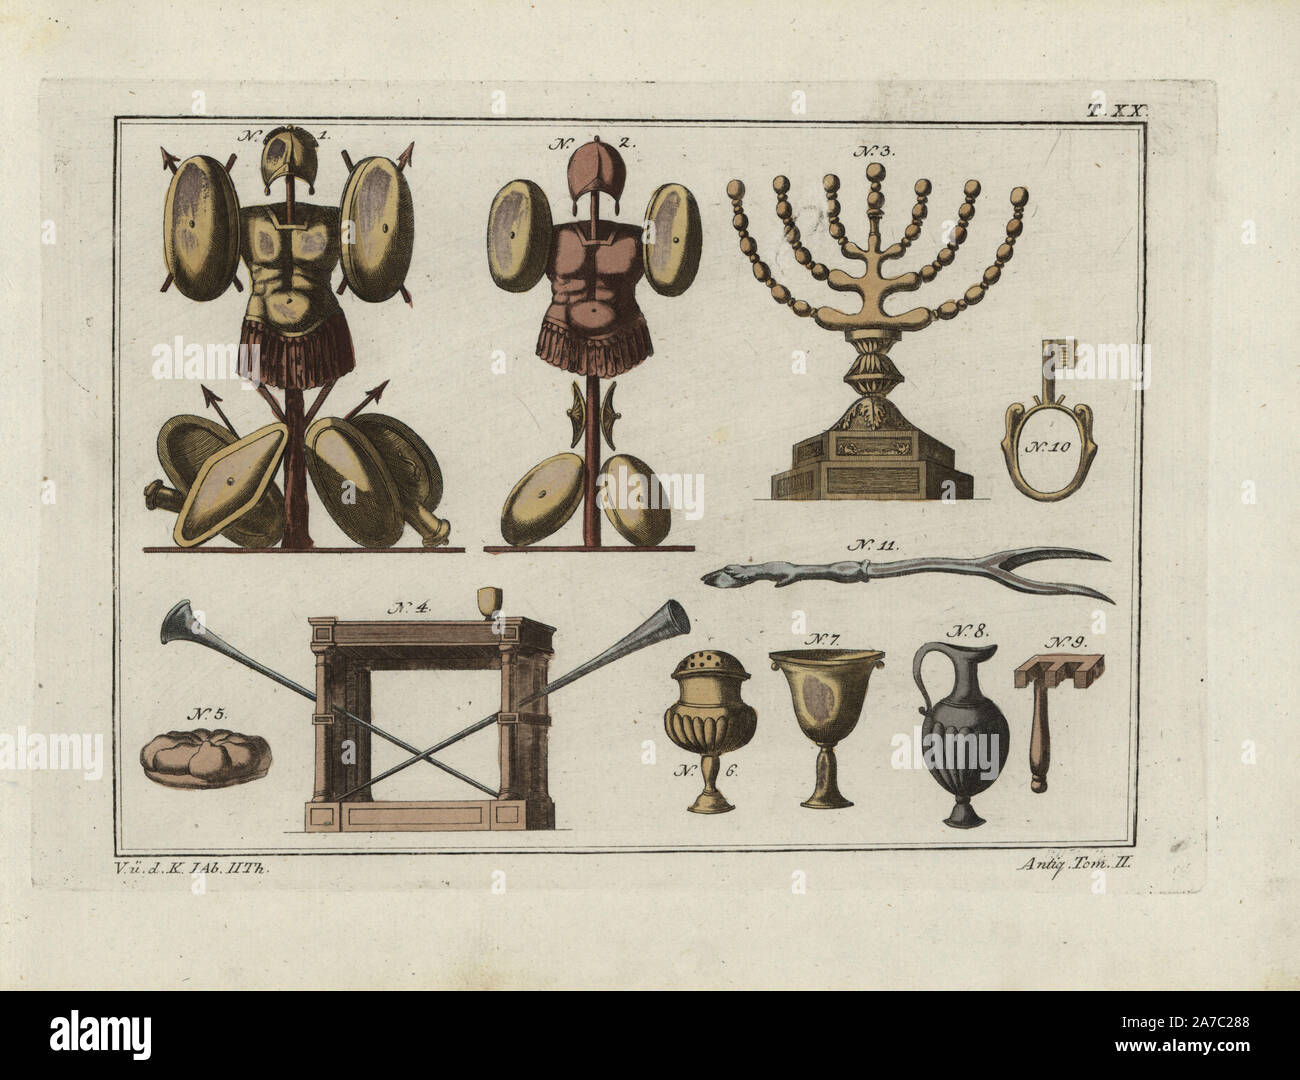 Hebrew helmets, chandelier, table, bread, vases, keys and antique fork. Handcoloured copperplate engraving from Robert von Spalart's 'Historical Picture of the Costumes of the Principal People of Antiquity and of the Middle Ages,' Chez Collignon, Metz, 1810. Stock Photo